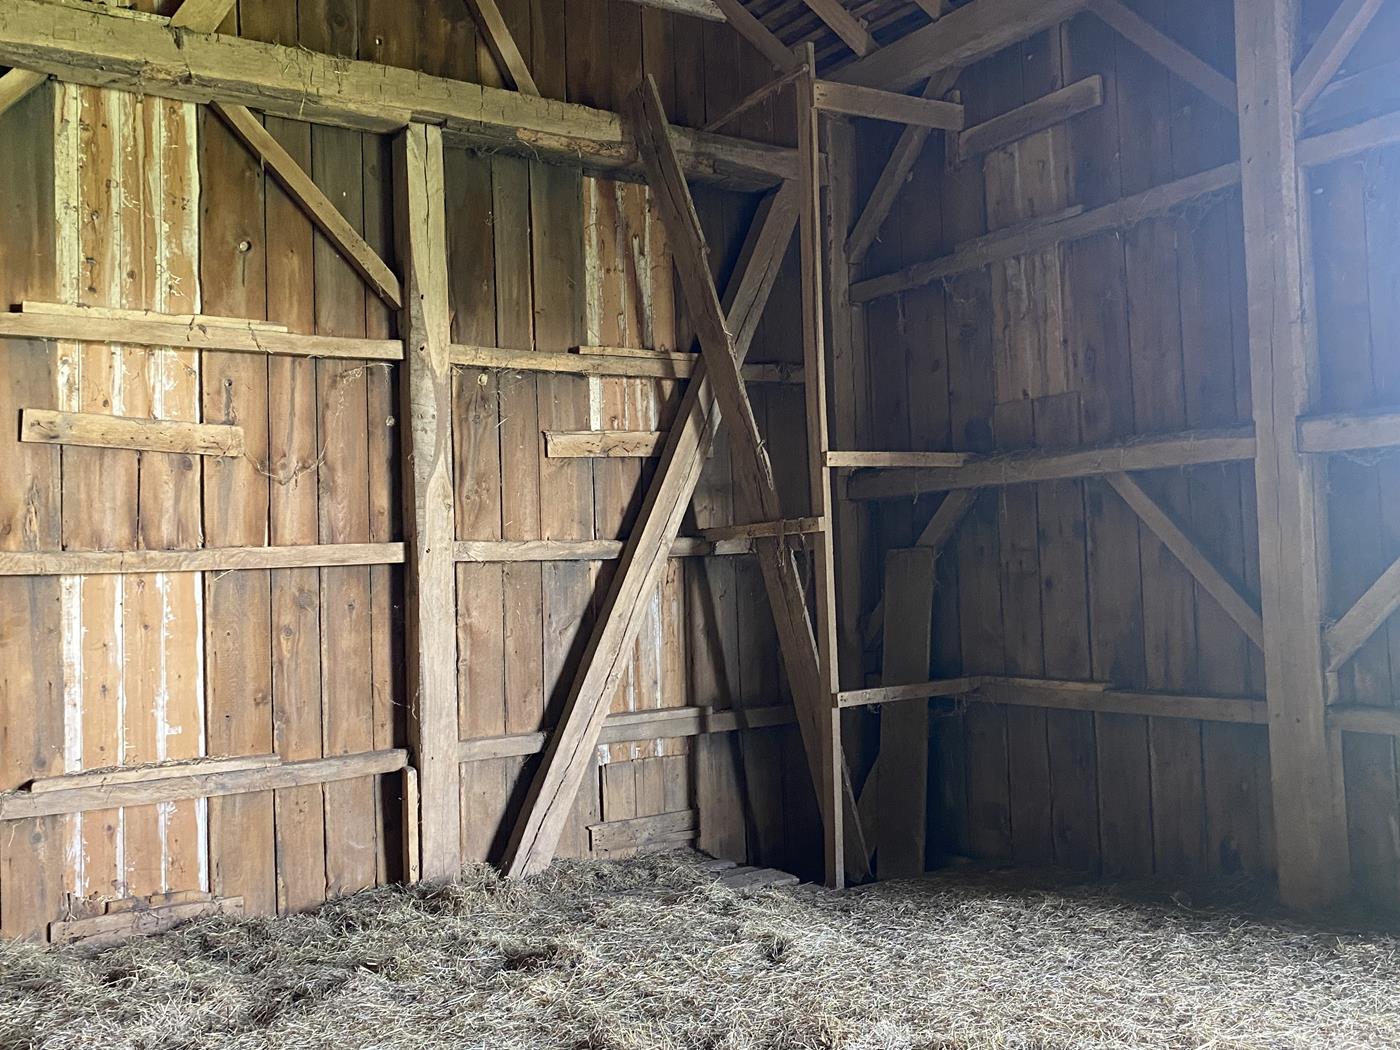 https://www.ohiovalleybarnsalvage.com/images/Marlatt Historic Ohio Barn Frame For Sale - Your Source For White Oak Hand-Hewn Timbers